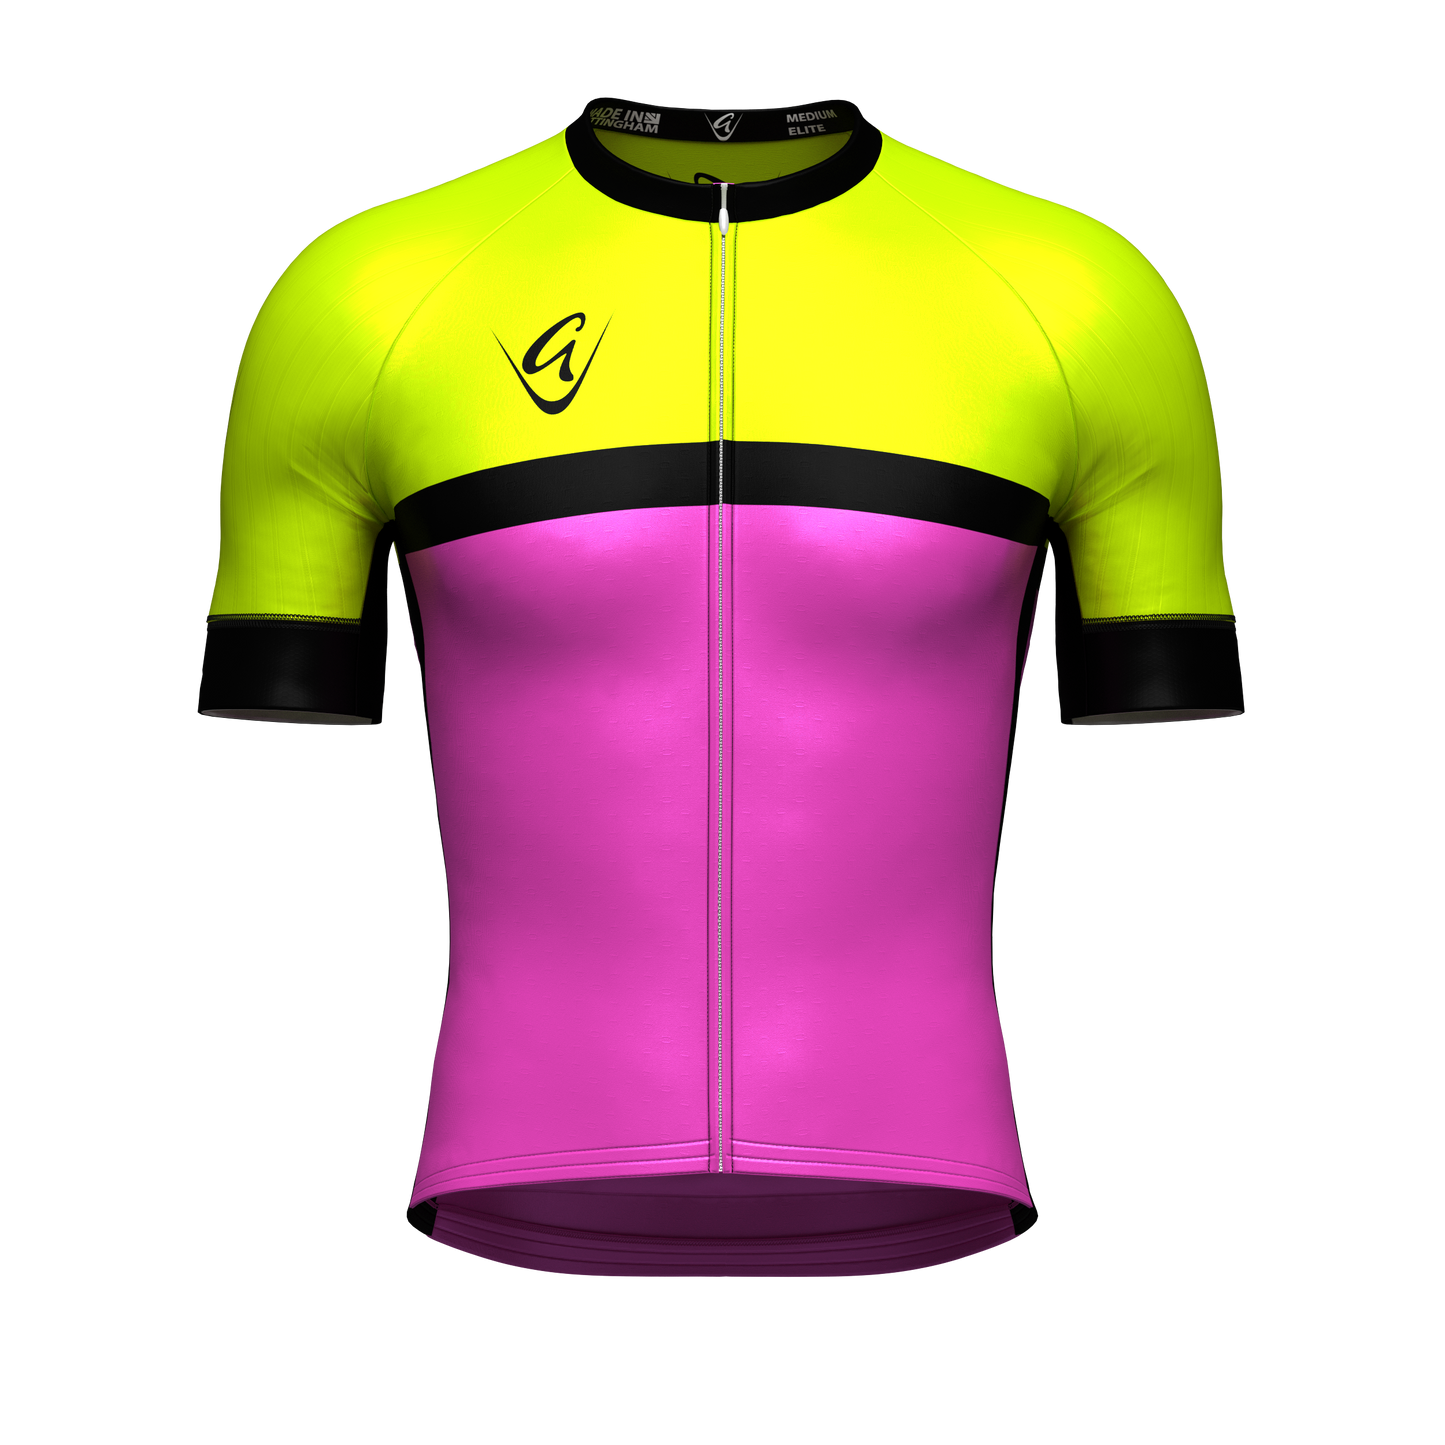 Now you see me Short Sleeve Elite Cycling Jersey